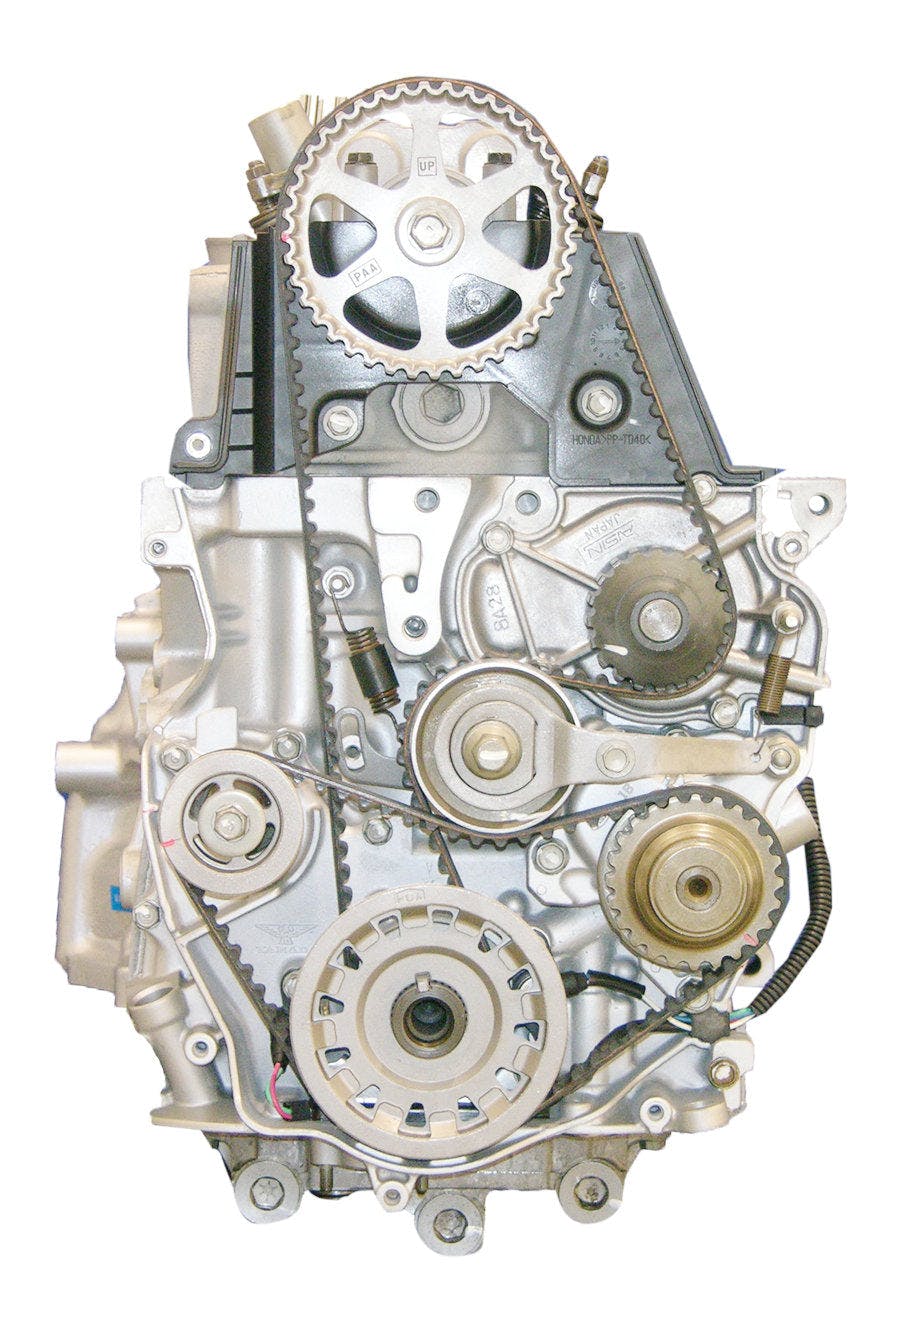 2.3L Inline-4 Engine for 1998-2002 Acura CL/Honda Accord